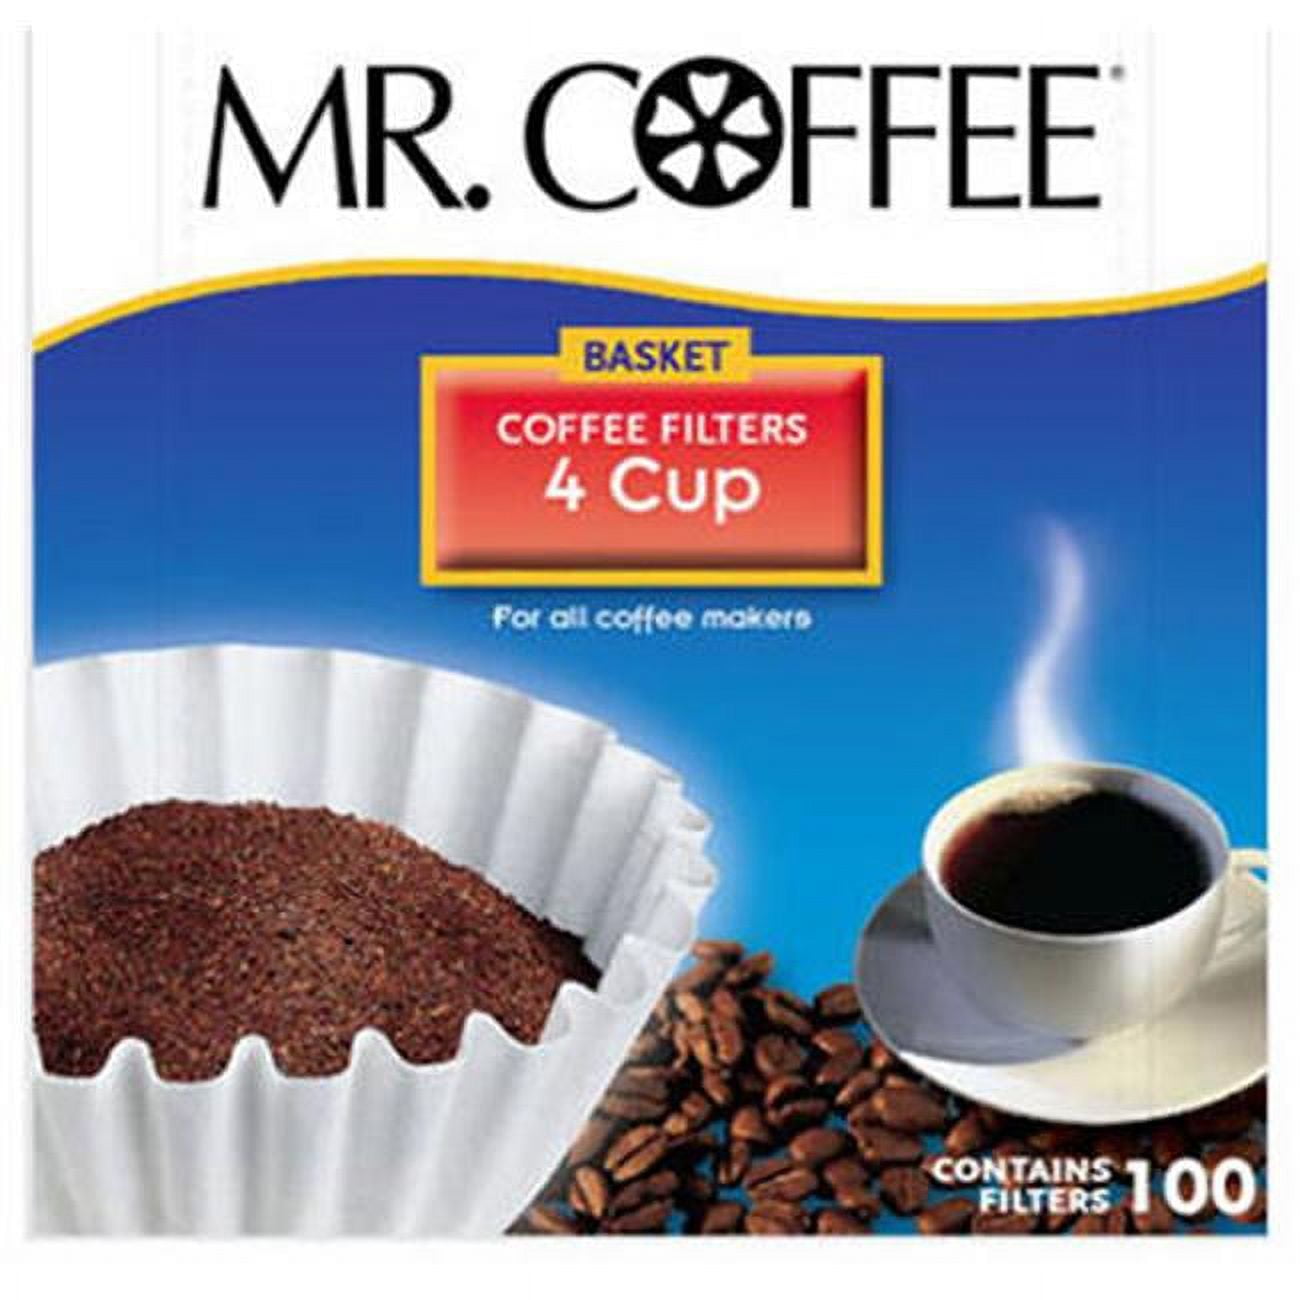 MUCXNIIY 1-2 Cup White Coffee Filters, 100 Count Unbleached Basket Coffee  Filter Paper for Miniature Mr Coffee, Small Coffee Maker, Single Serve